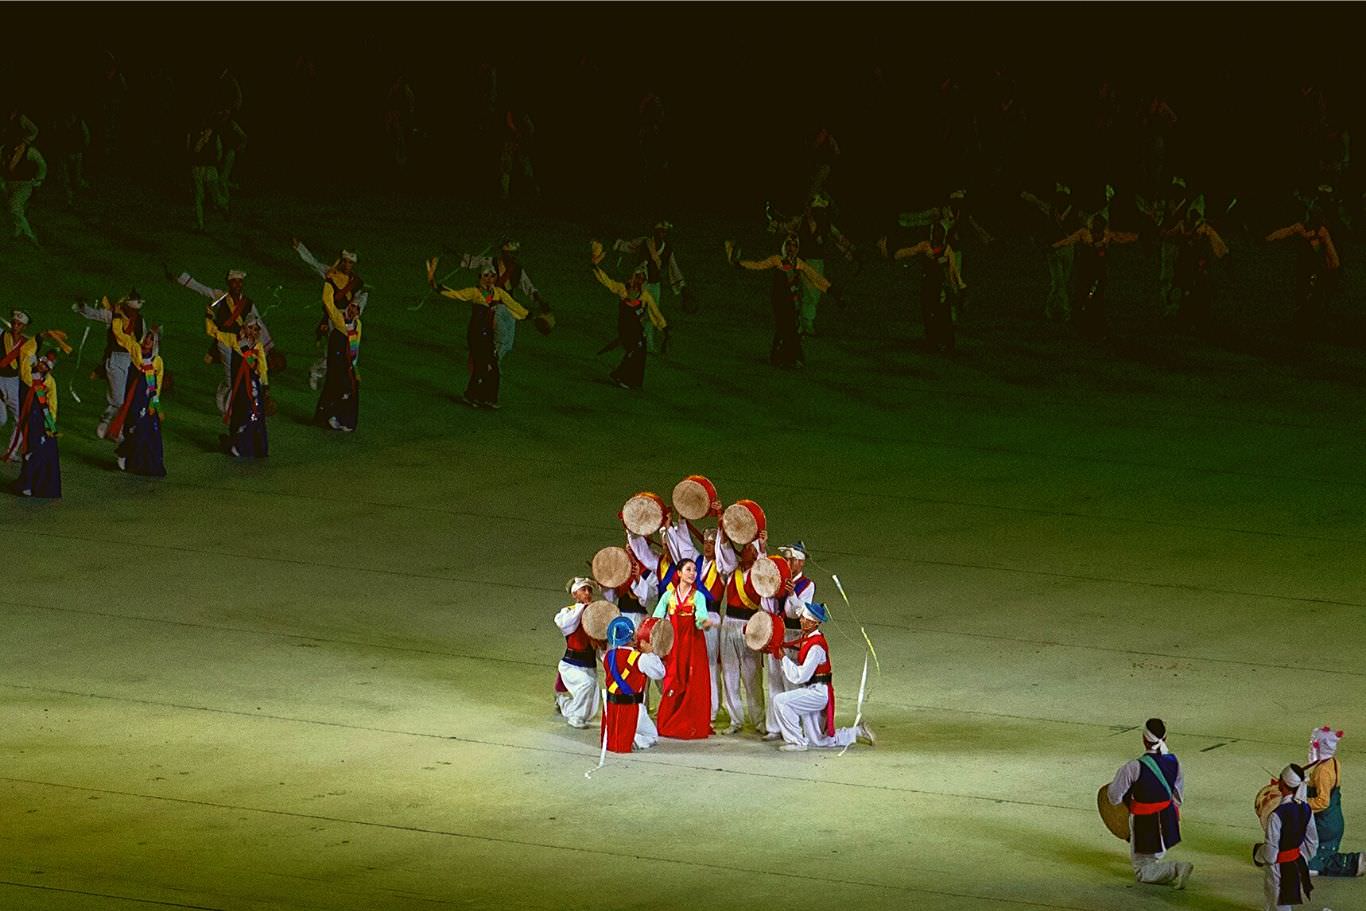 Artistic performance during the Mass Games held in Pyongyang, capital of North Korea aka DPRK. Tour arranged by KTG